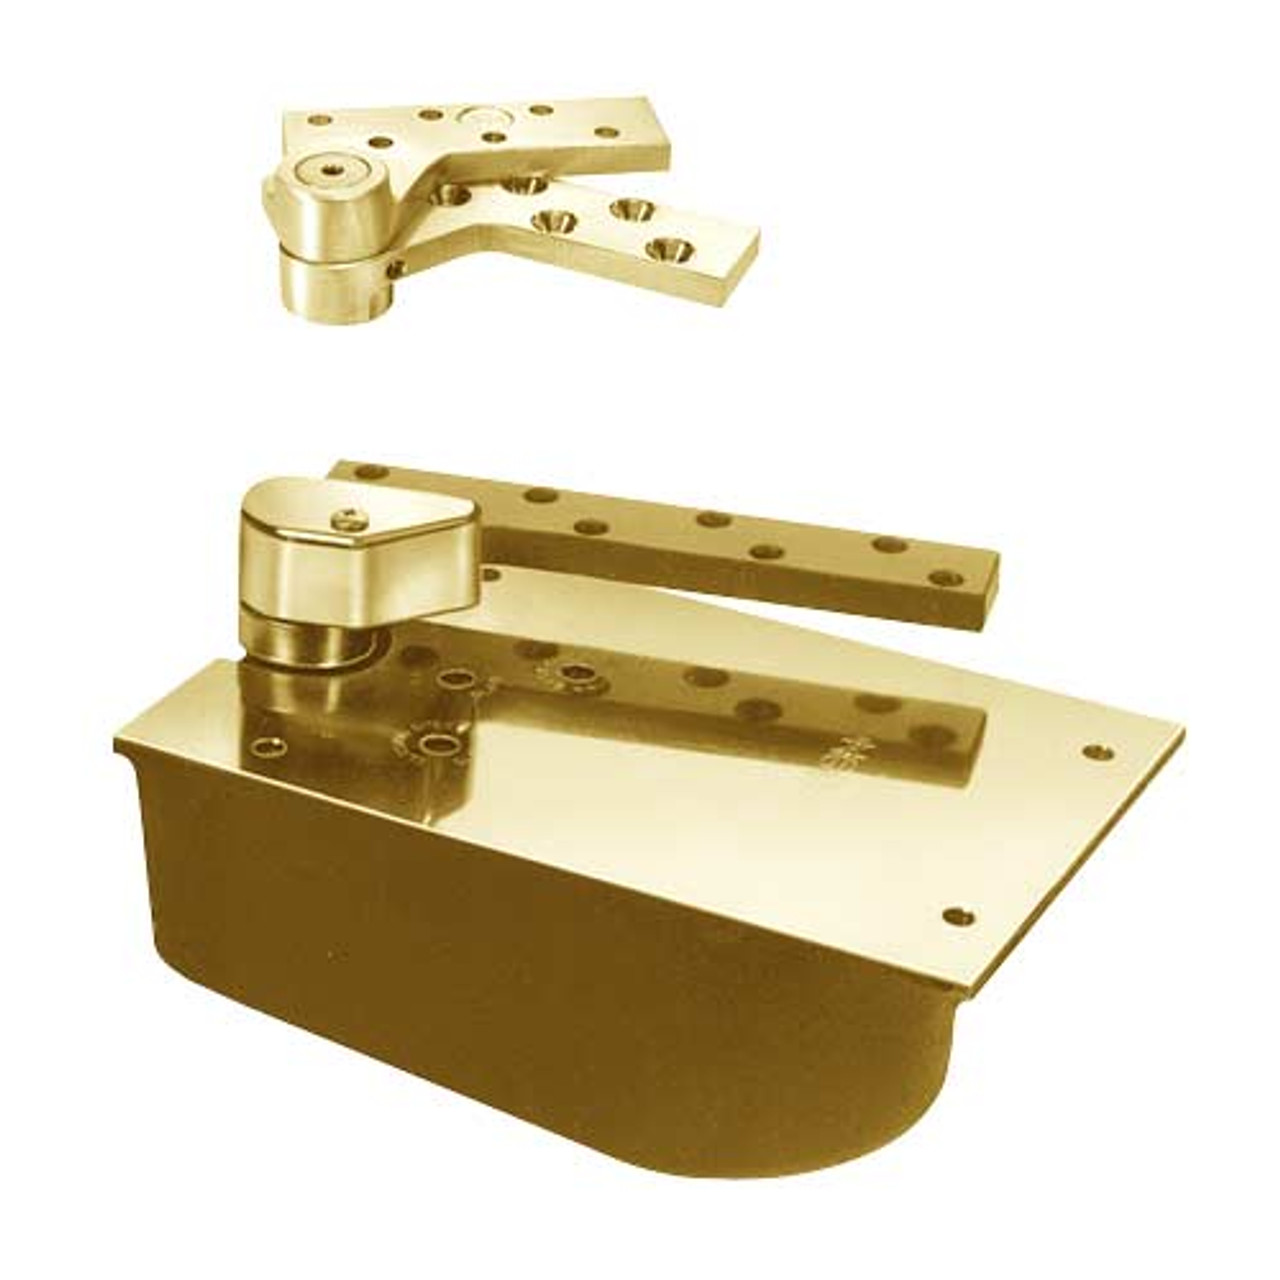 L27-85N-LTP-LH-2-605 Rixson 27 Series Extra Heavy Duty Lead Lined Offset Floor Closer in Bright Brass Finish